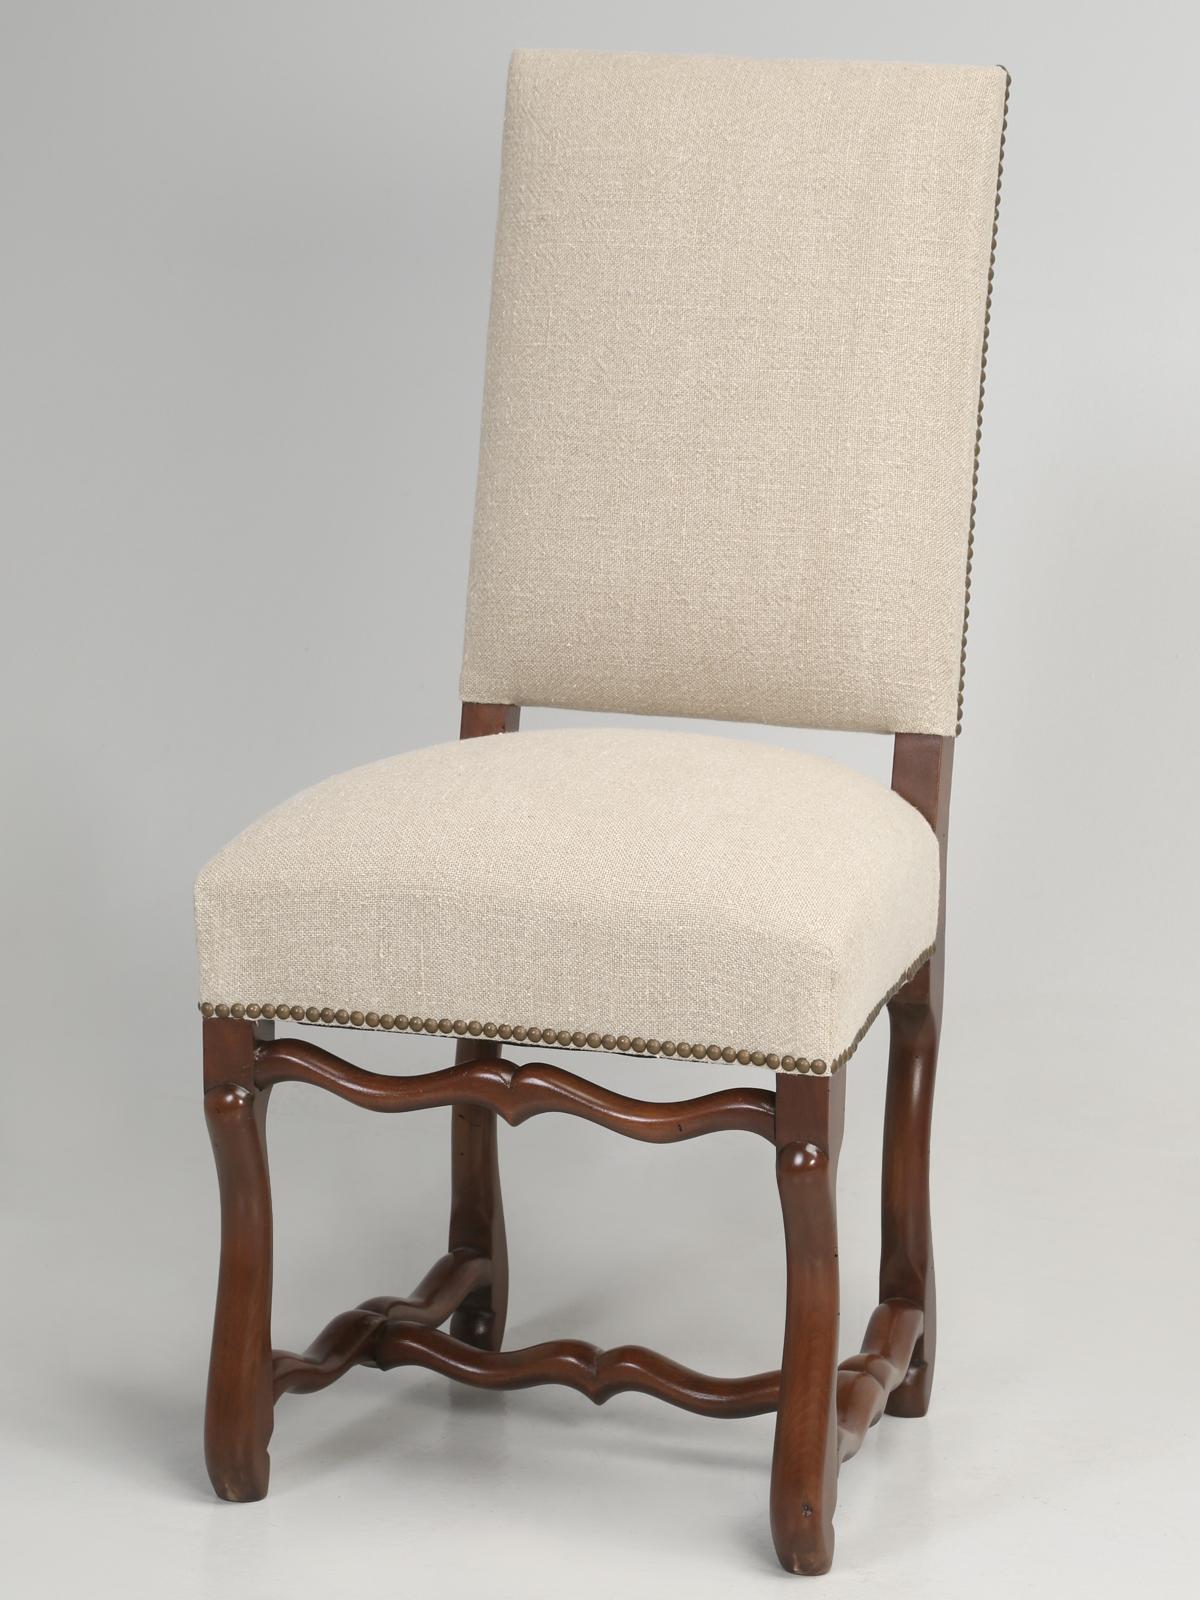 French Os De Mouton Dining Chairs, Set of 8, Irish Linen, Completely Restored 2